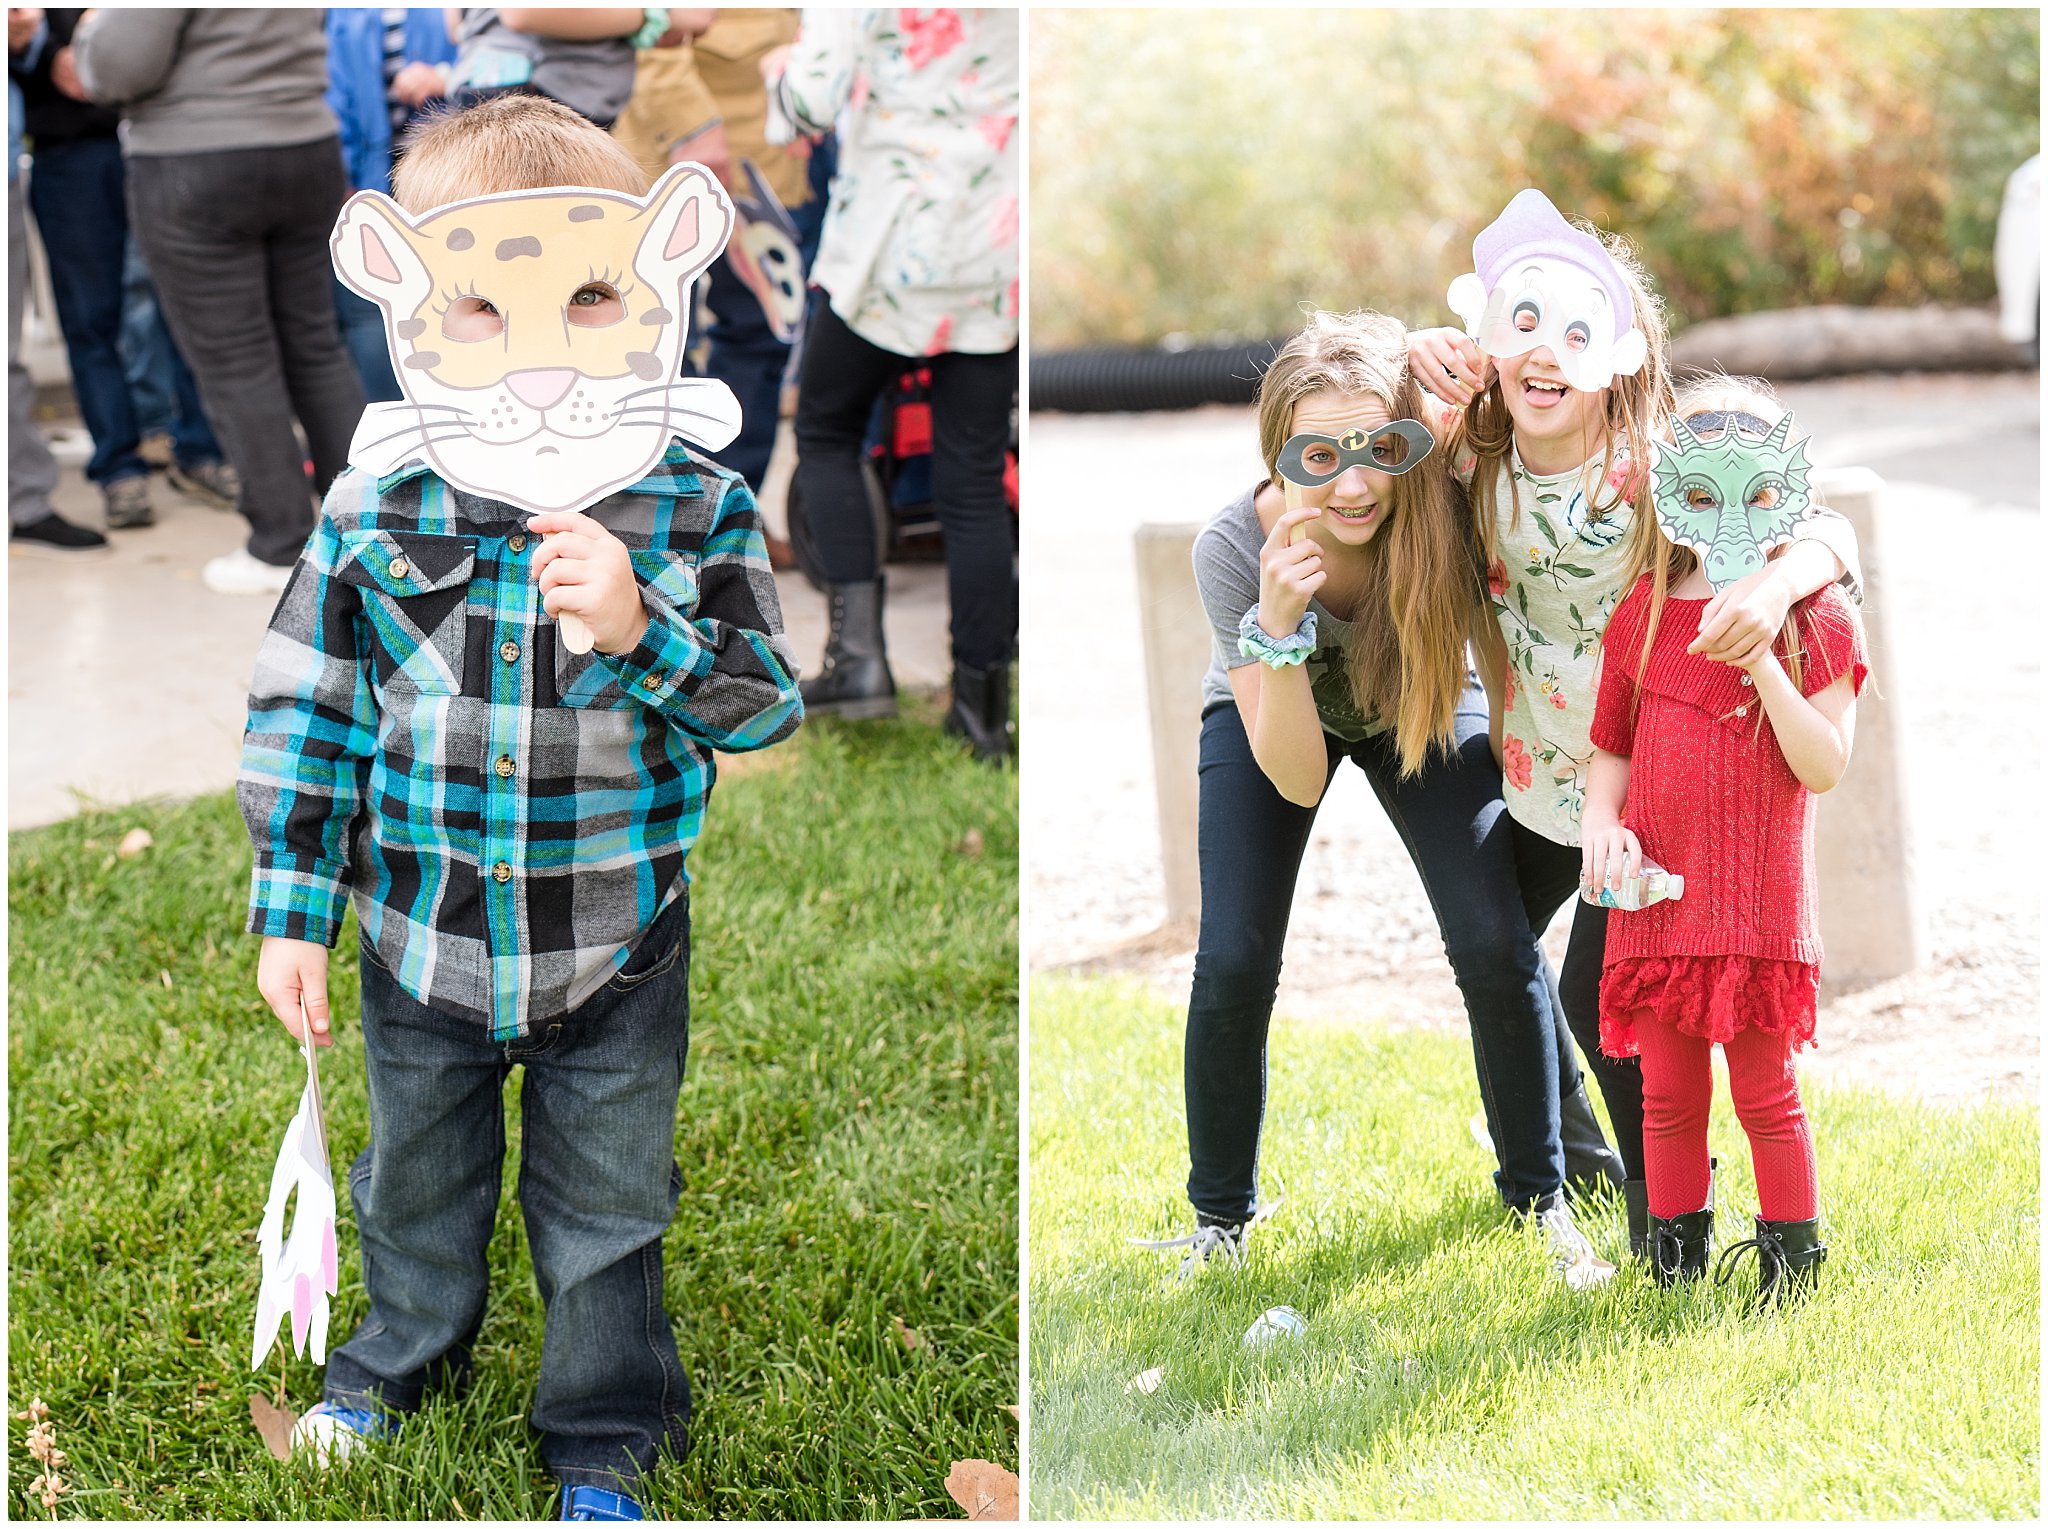 Kids wearing Disney masks at Make a Wish event | Tremonton Family Pictures and Make a Wish Event | Jessie and Dallin Photography